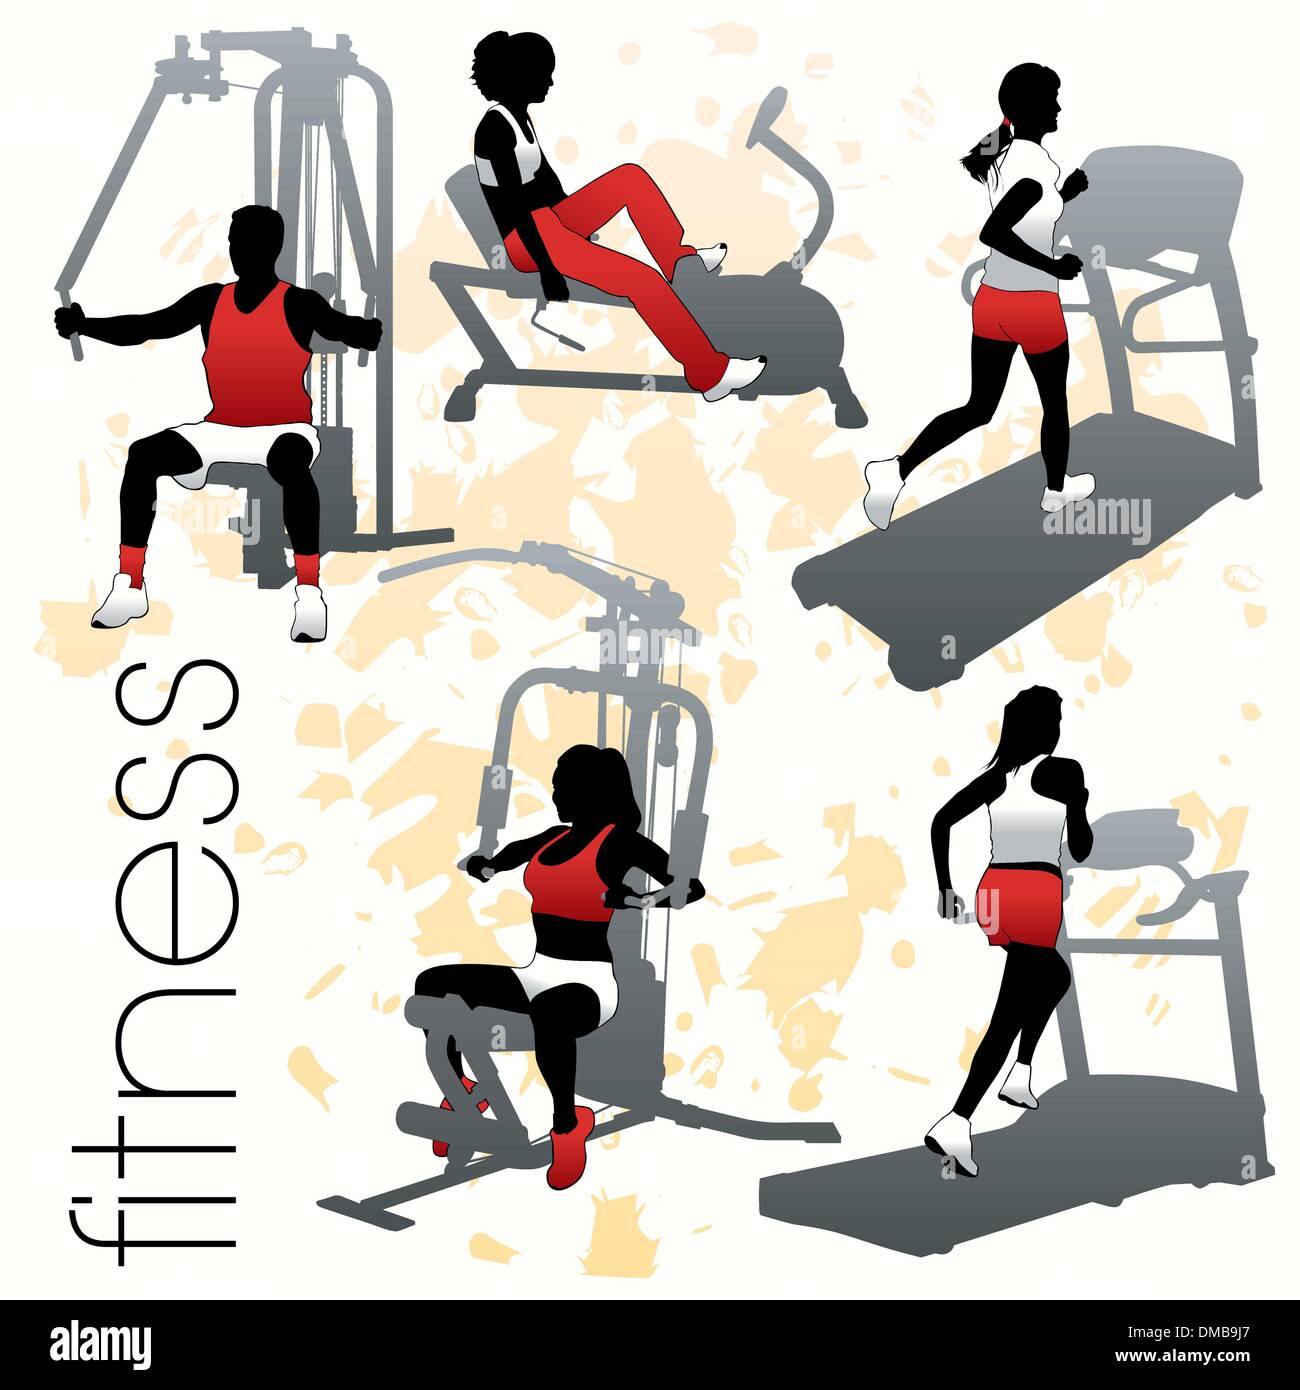 Fitness Silhouettes Set Stock Vector